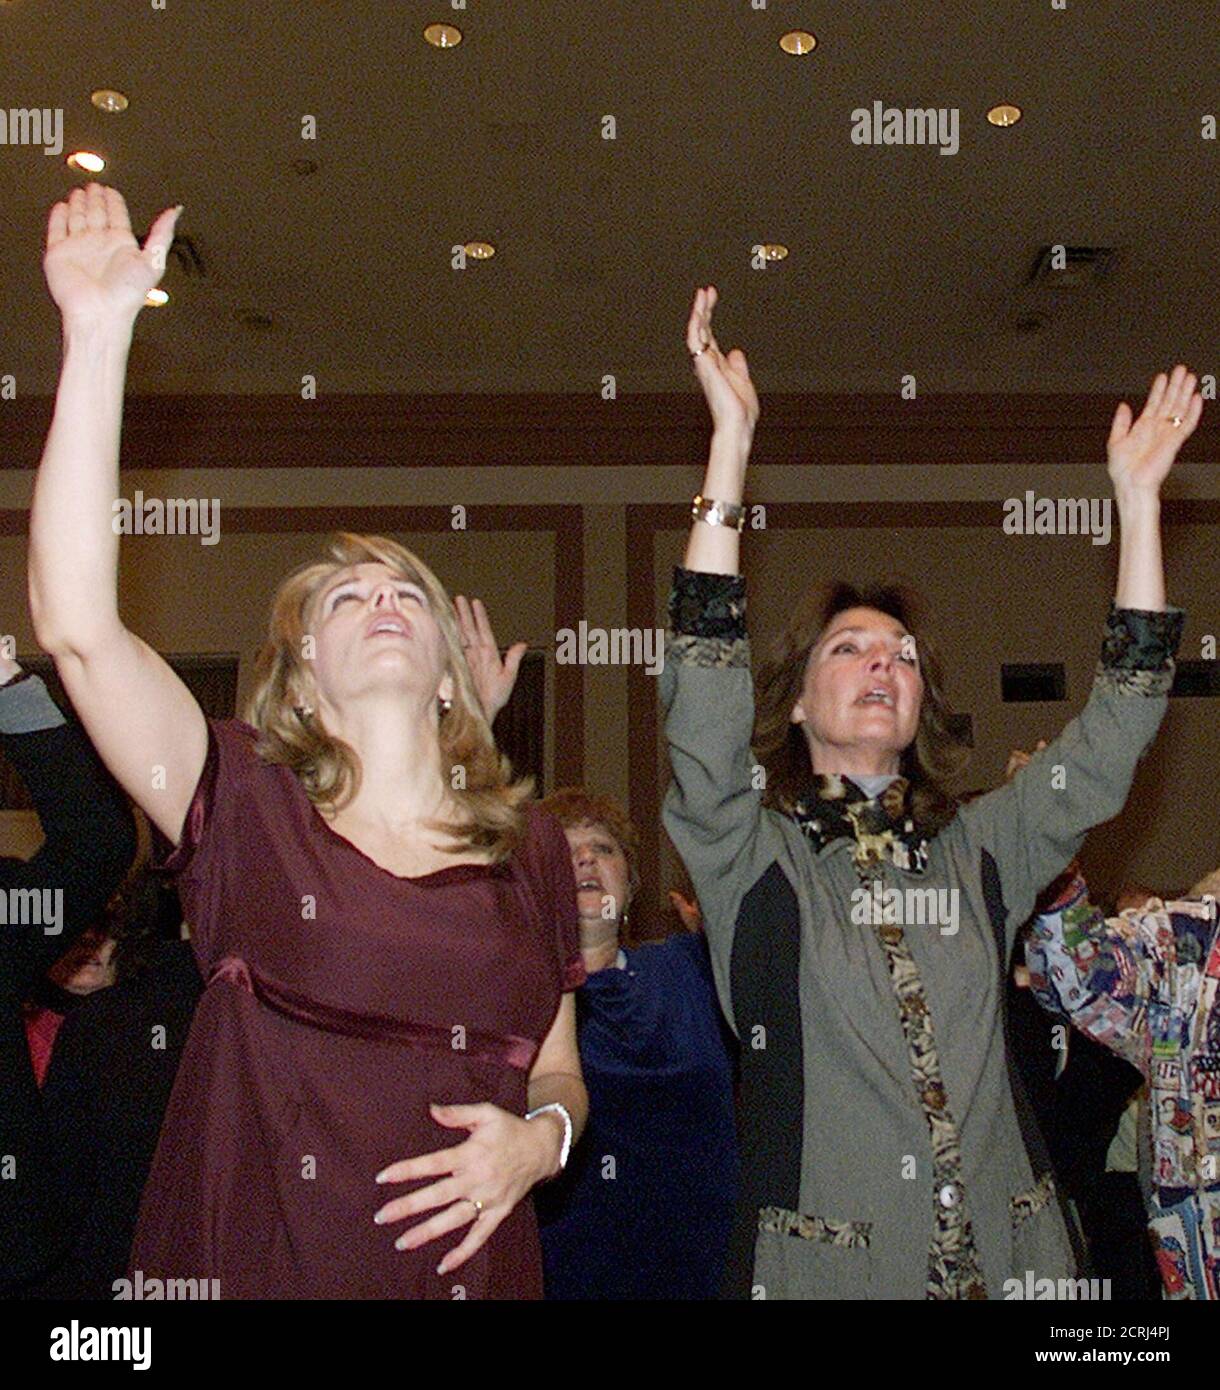 Actress and author Jennifer O'Neil (R) sings next to an unidentified woman during an anti-abortion event on Capitol Hill in Washington held by The National Pro-life Religious Council, January 22, 2003. Activists on both sides of the abortion debate rallied on Wednesday to mark the 30th anniversary of the U.S. Supreme Court ruling Roe v. Wade legalizing abortion. REUTERS/Brendan McDermid Stock Photo